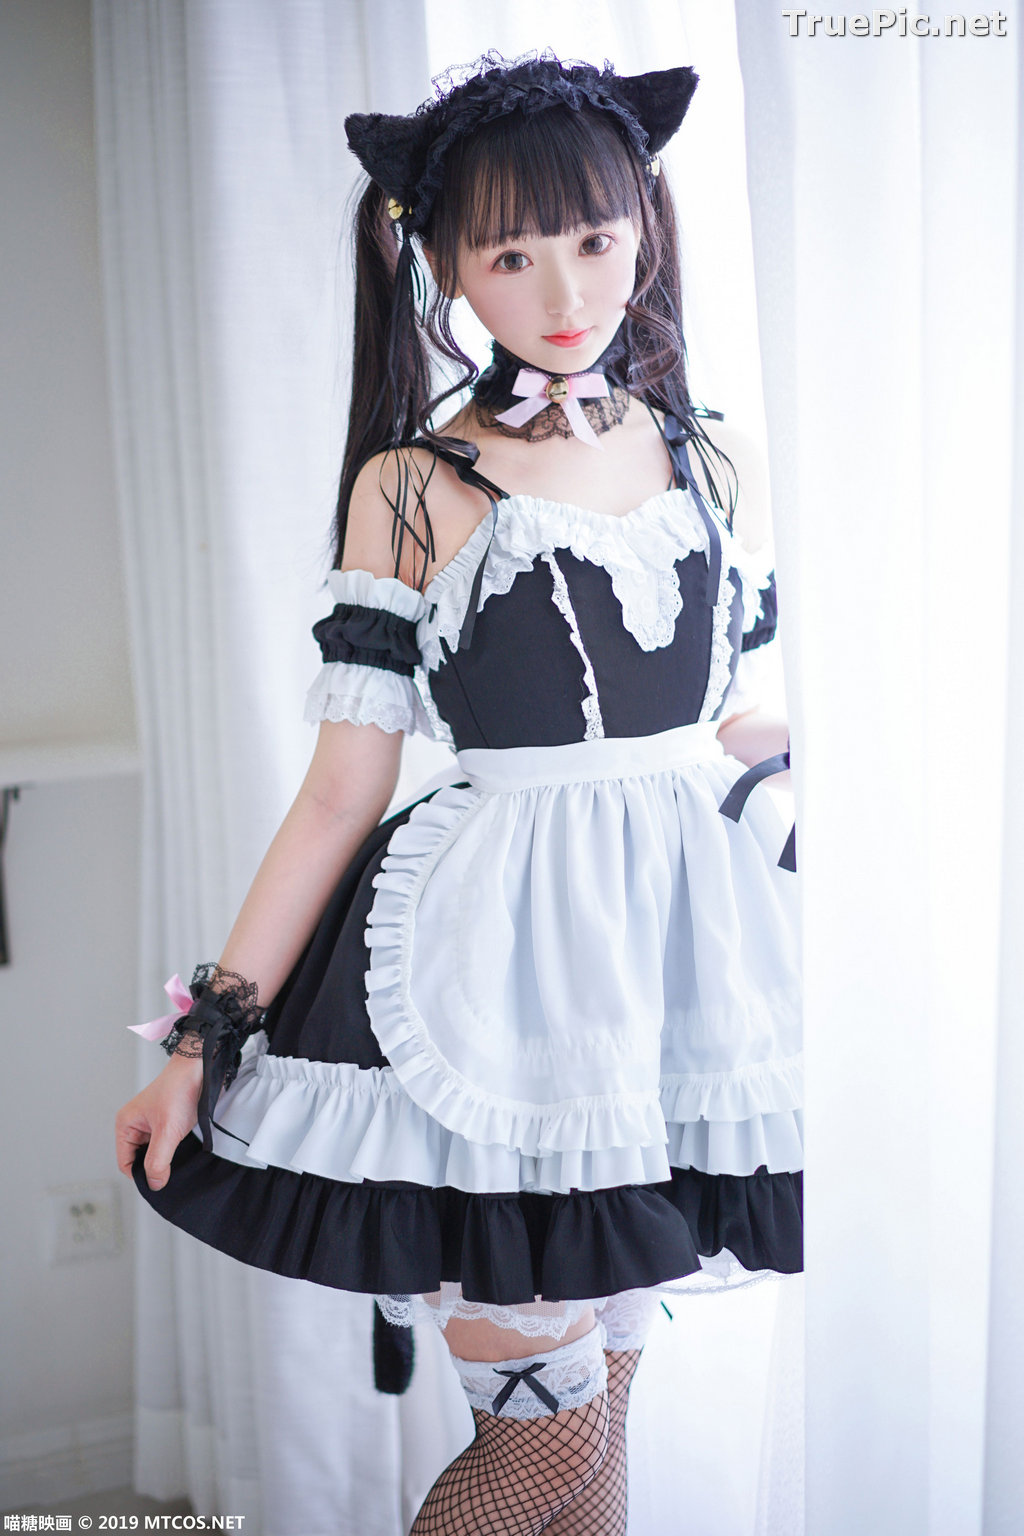 Image [MTCos] 喵糖映画 Vol.051 - Chinese Cute Model - Lovely Maid Cat - TruePic.net - Picture-11